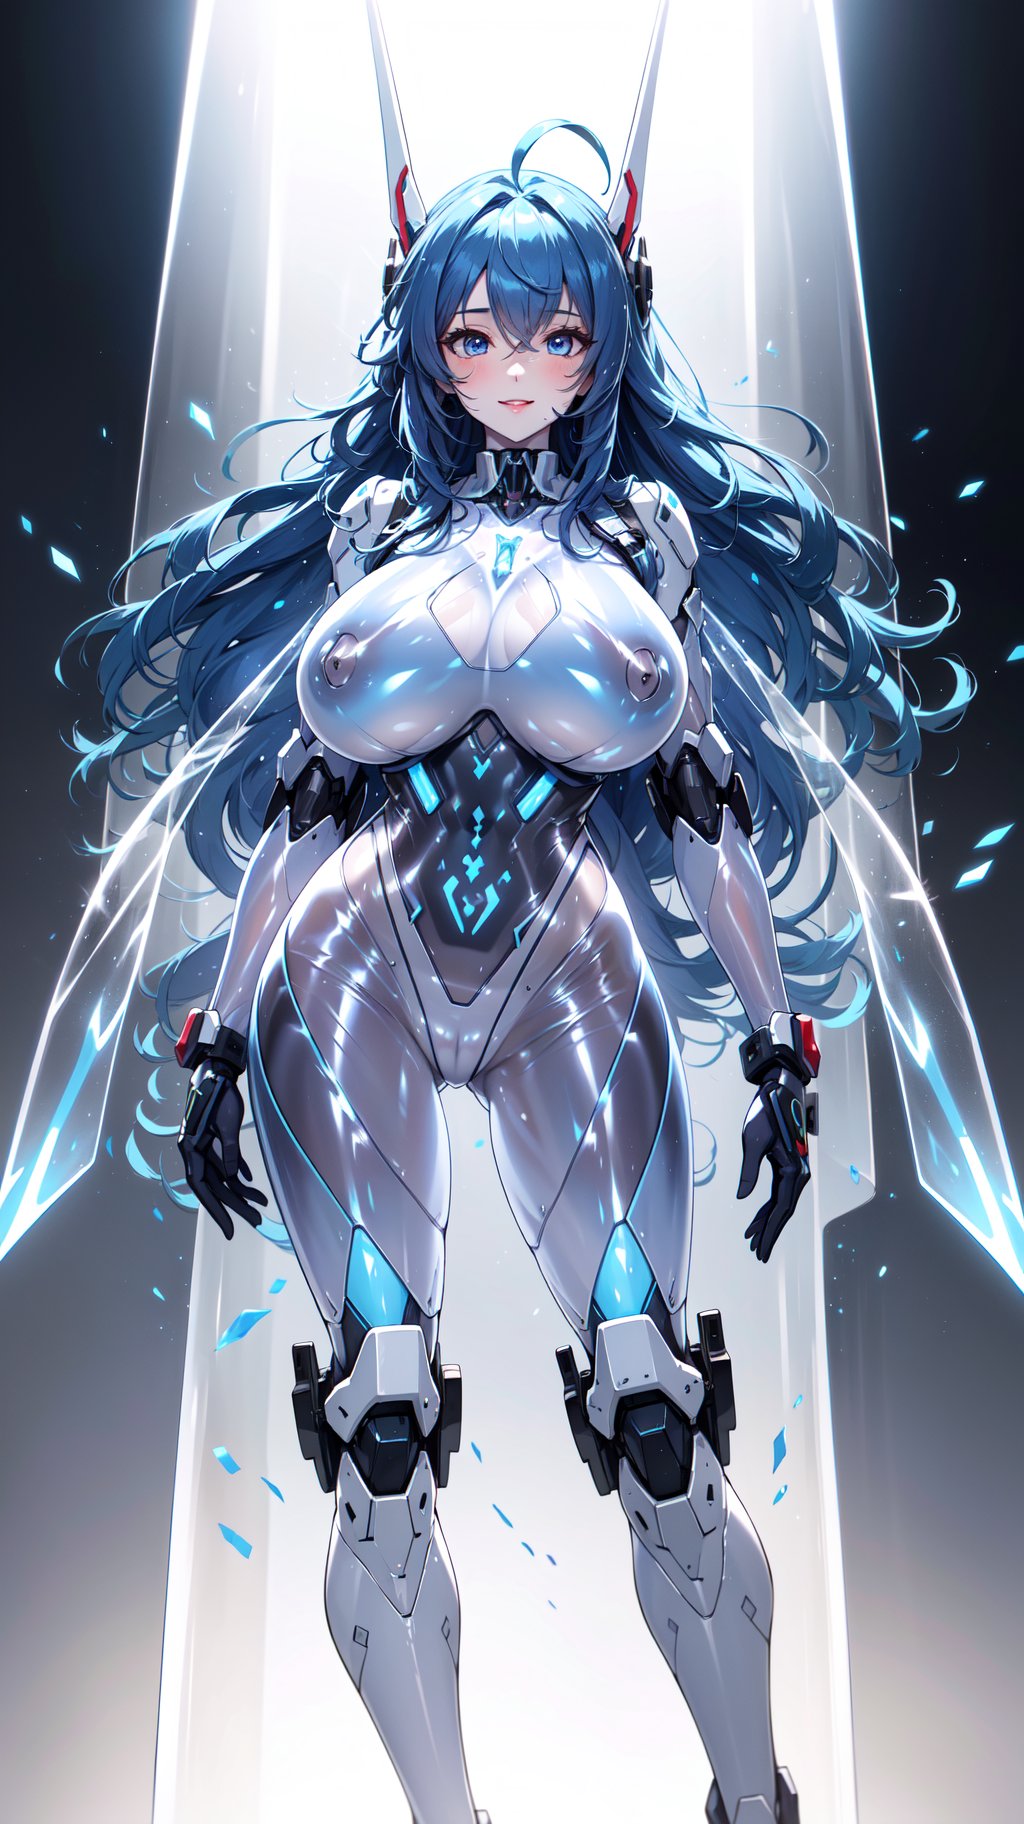 Full body:1, (Masterpiece), (Best Quality), (Extremely Detailed), Illustration, (High Resolution), High Quality, ((dynamic photo angle)), dynamic perspective,


((huge breasts)),(extremely huge breast), (wide hips), small waist, tall girl, voluptuous body, fitnes, pale skin, ((long hair)), (voluptuous girl), fitness girl, muscle girl


((Standing)) dynamic and sexy pose, dynamic pose, dynamic image, (sexy position, lewd position:1), tall girl, long legs

 
mechanical, cowboy shot, (translucent skin:1.5), leotard ,((biue bodysuit:1.5)), mecha girl, mecha dragón girl, sexy mecha girl:1, erotic mecha, (( mecha armor suit)),


(long hair, ahoge, blue hair), smile, blue eyes,helmdef,mecha